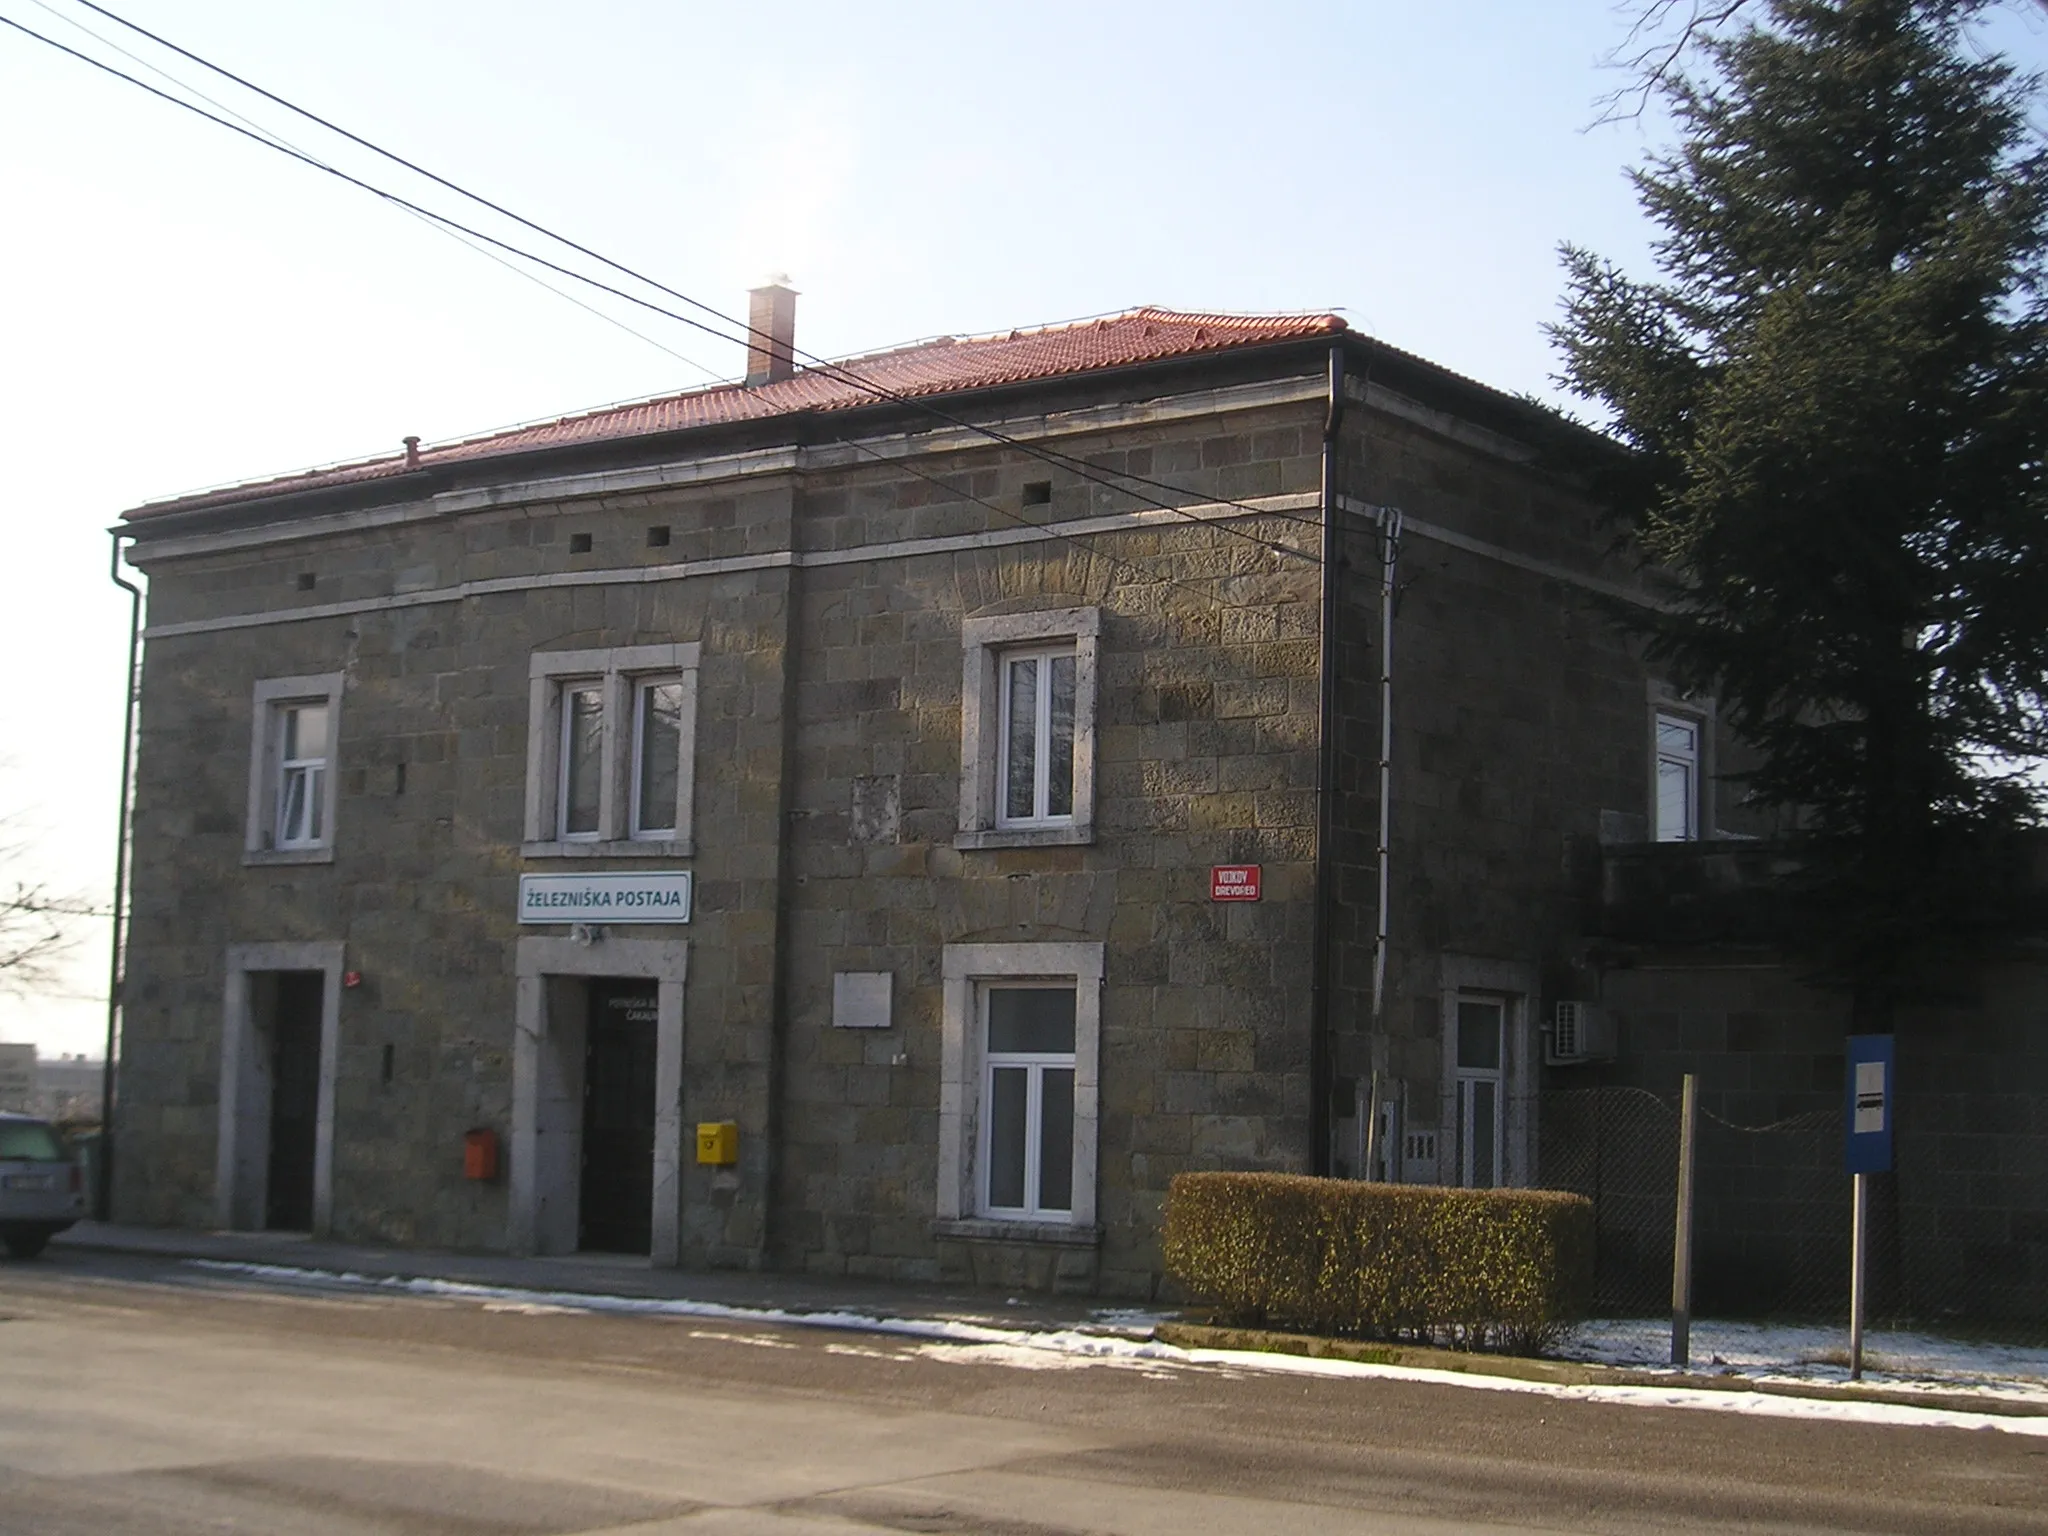 Photo showing: Train station in Ilirska bistrica, Slovenia - a view of the front side from Vojkov drevored